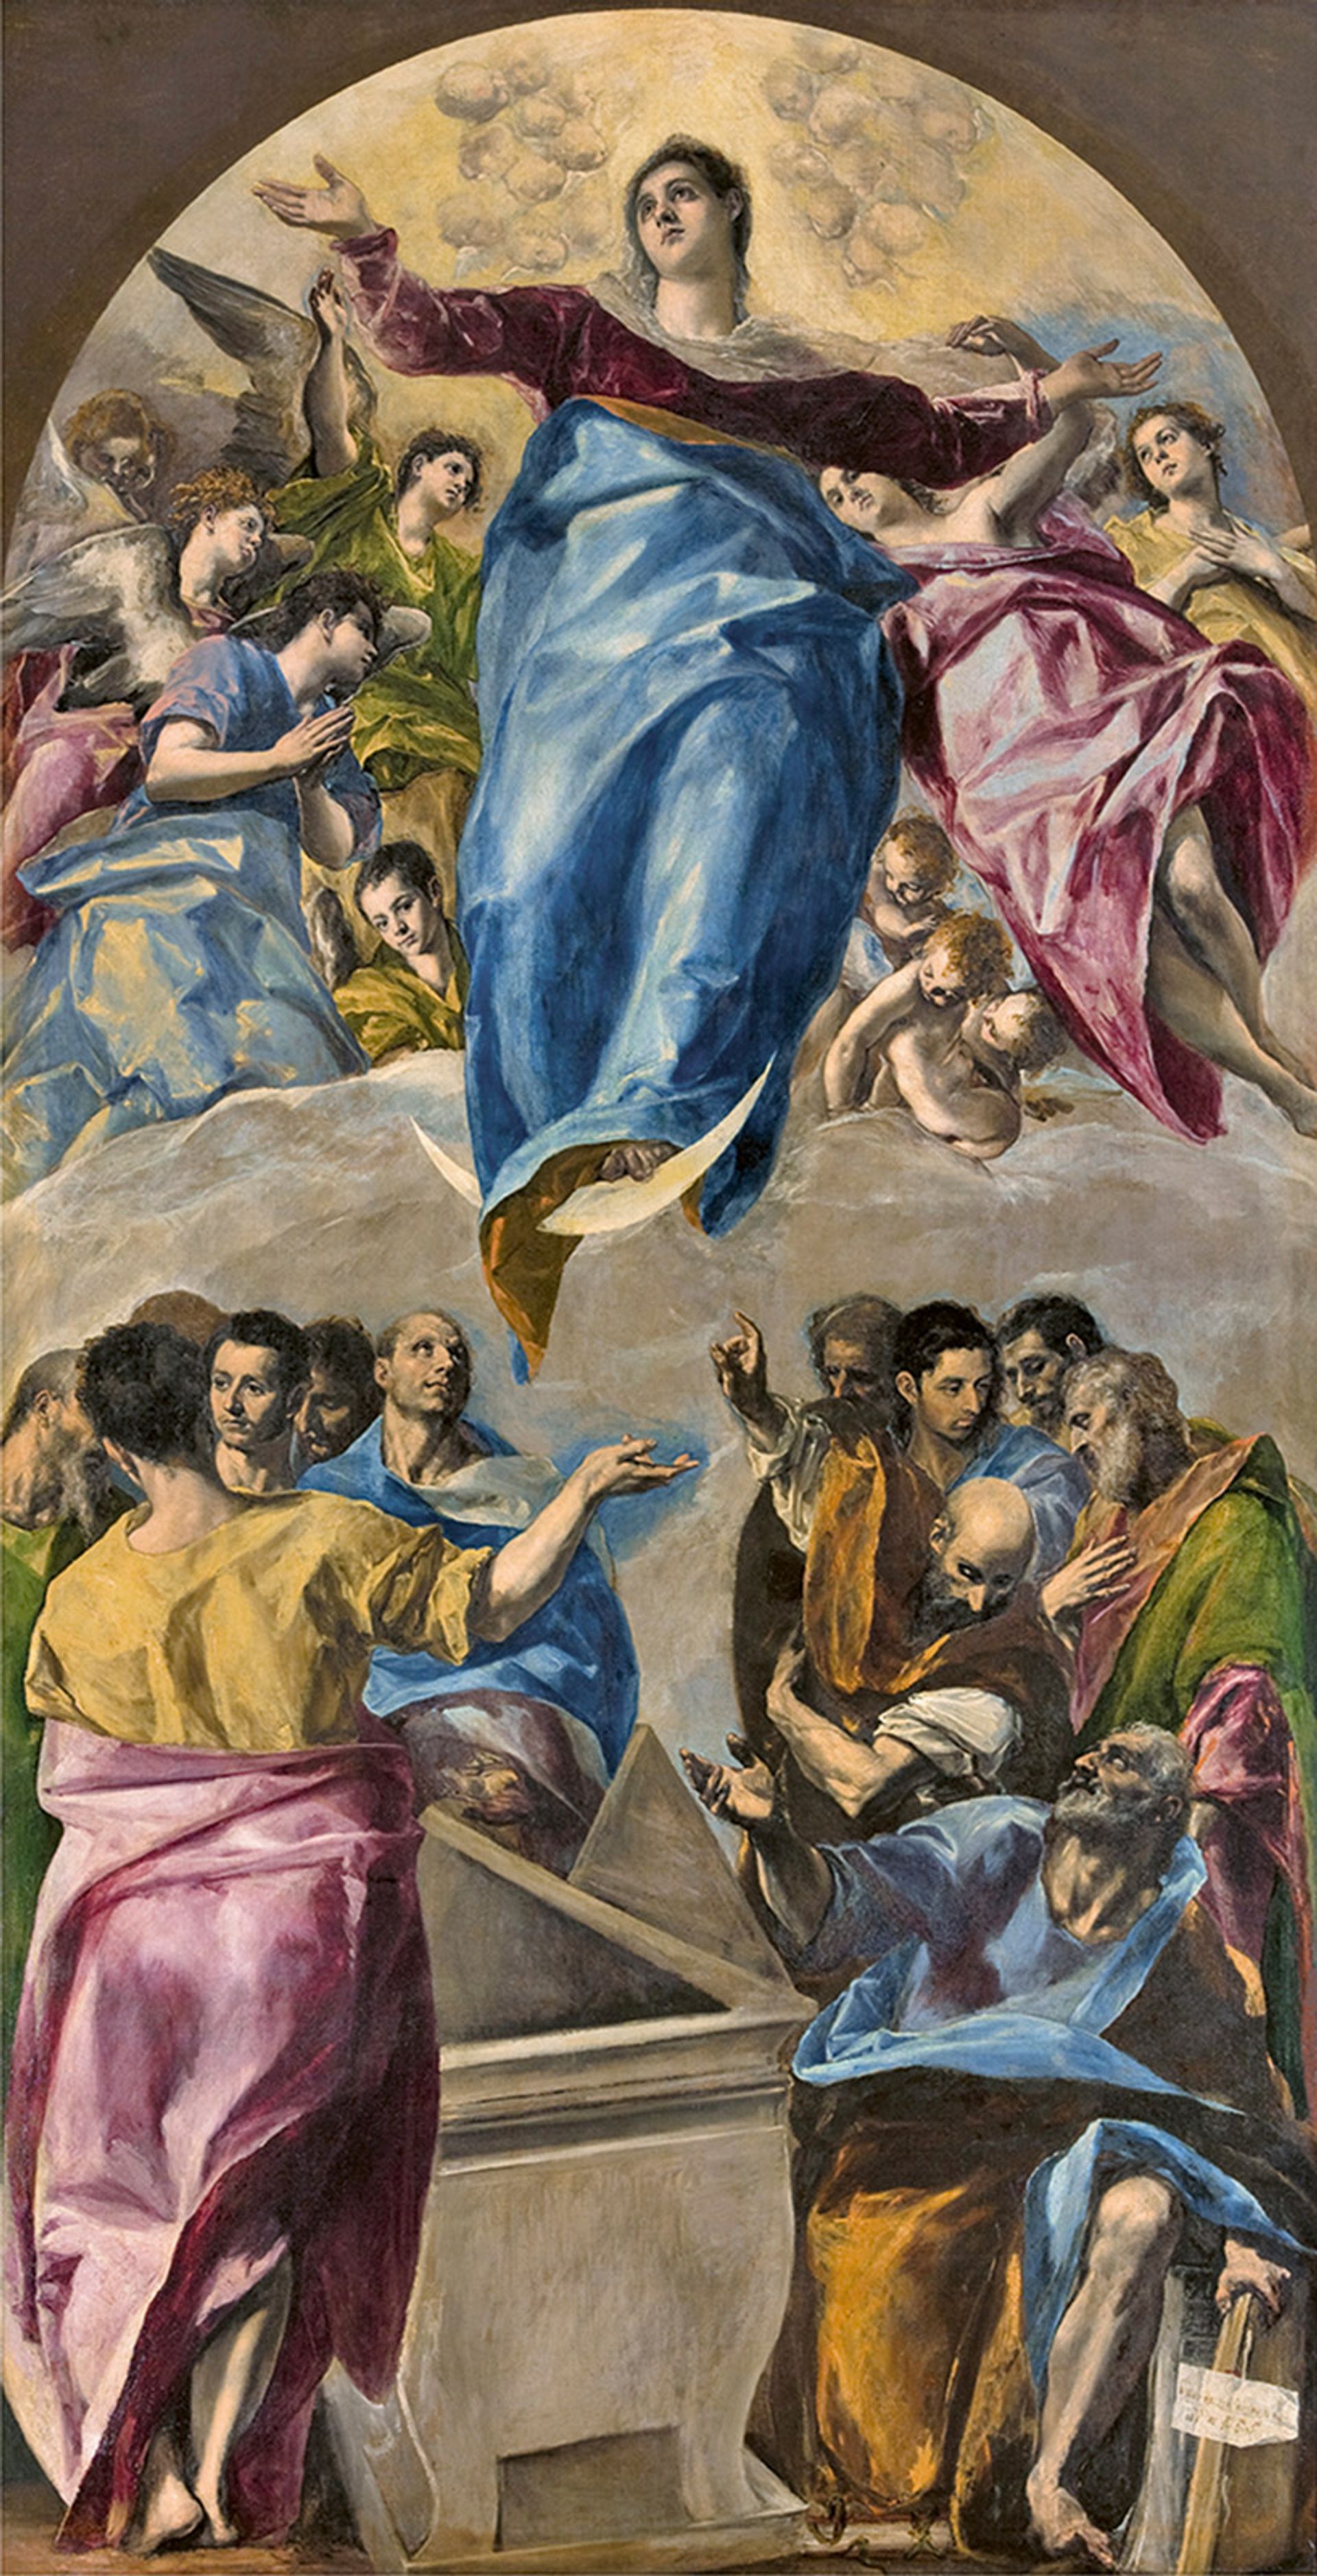 El Greco’s The Assumption of the Virgin (1577–79) was commissioned for the high altar of the church of Santo Domingo el Antiguo Photo © Art Institute of Chicago